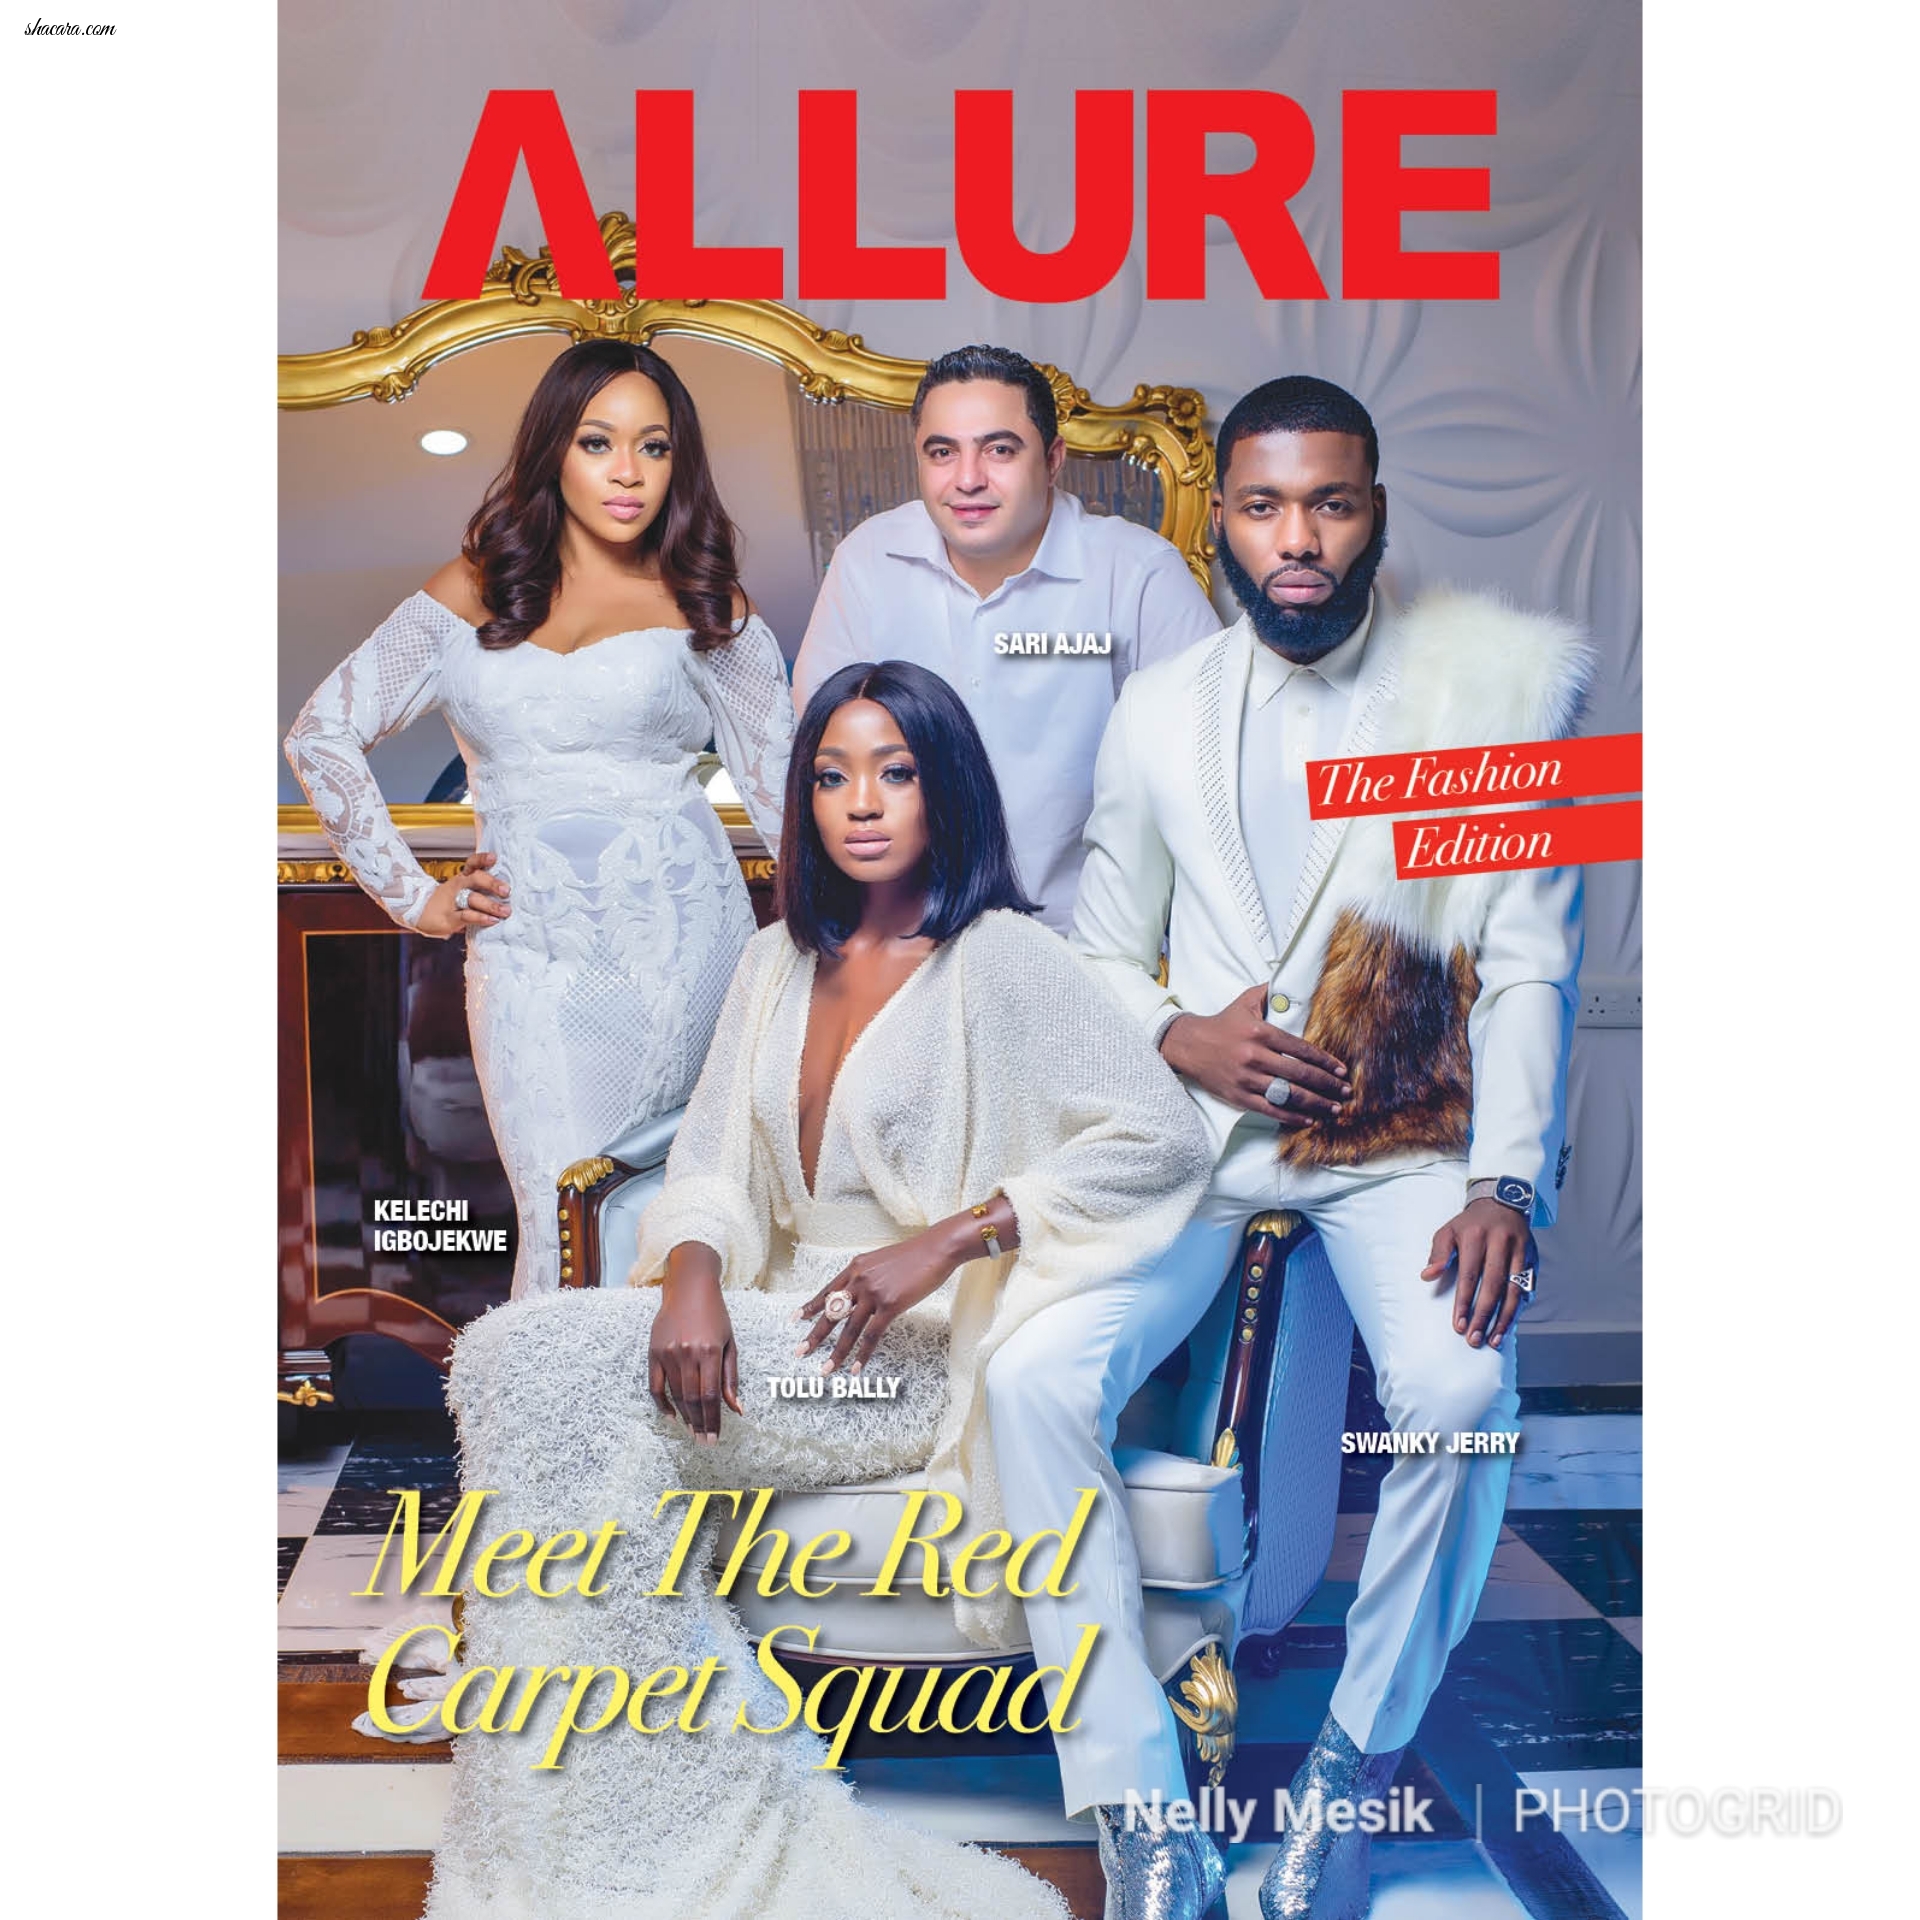 Swanky Jerry, Sari Signature, Tolu Bally & Belle Bedazzled Cover This Week’s Vanguard Allure